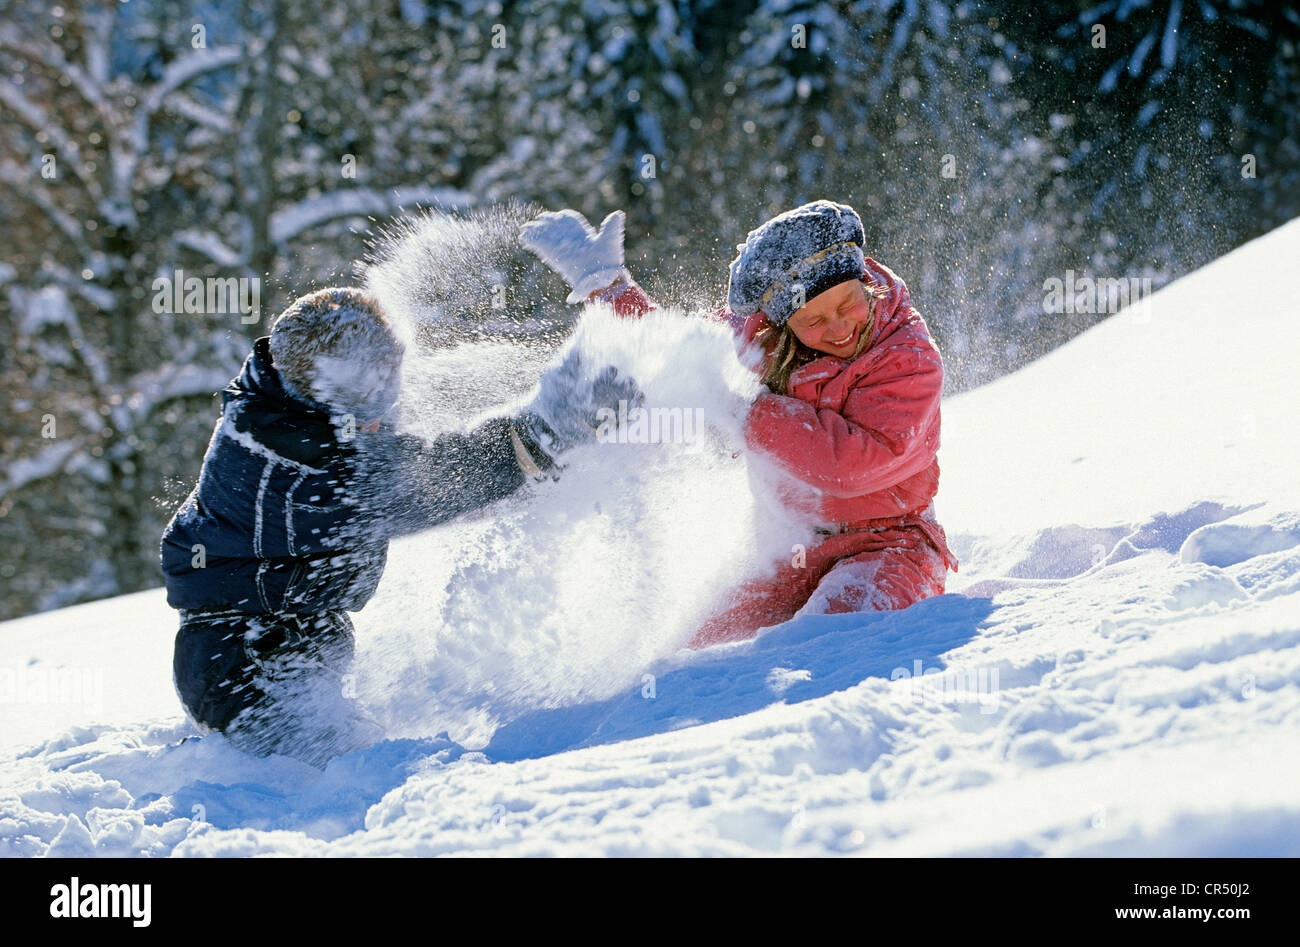 France, Savoie, Les Menuires, Domaine des 3 vallees (The three valleys), children playing in the snow Stock Photo